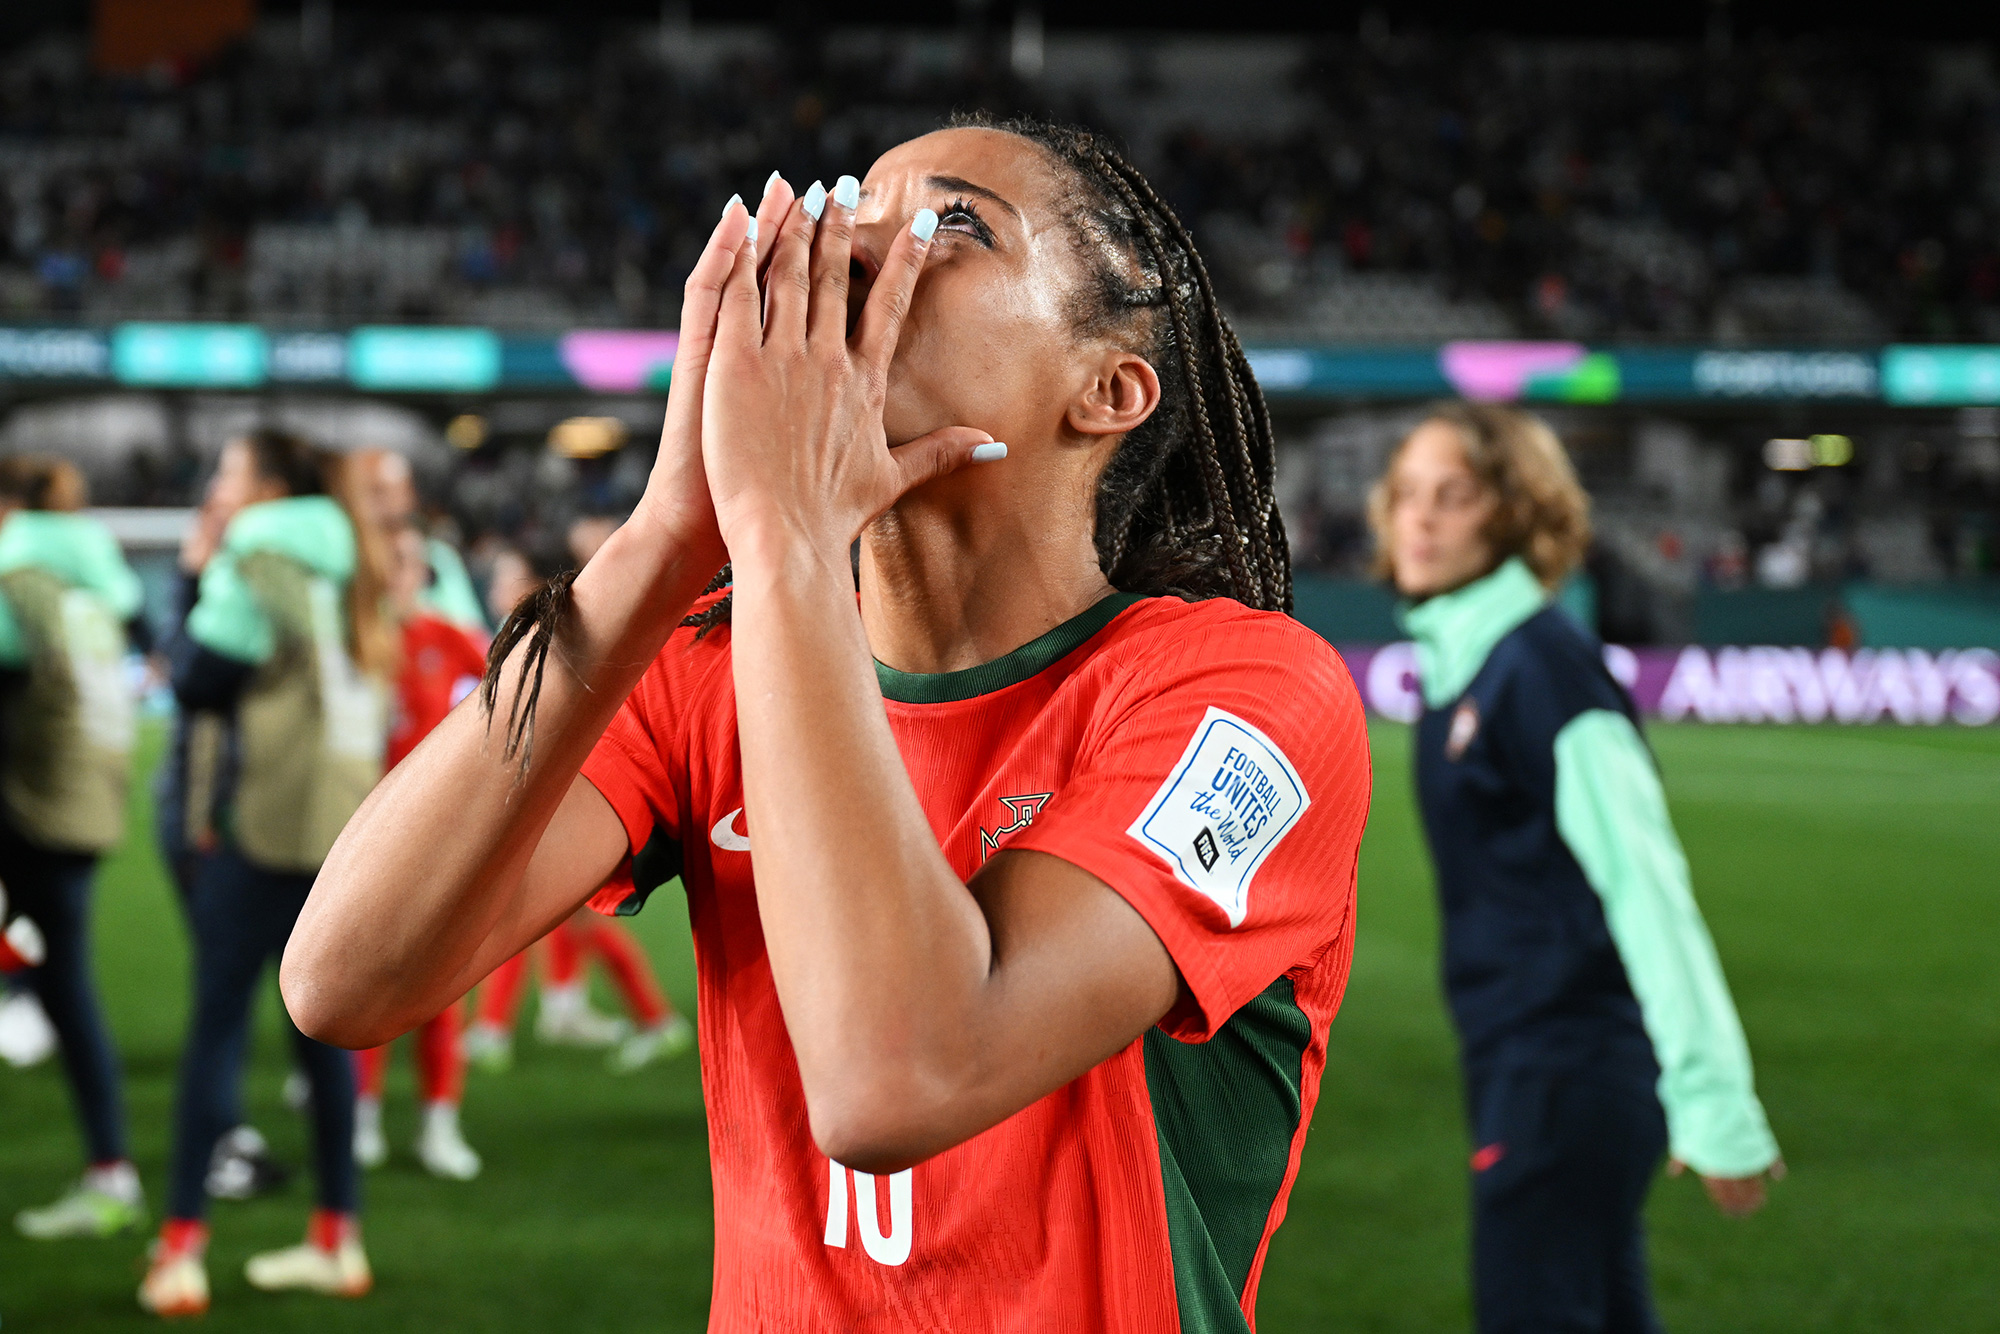 Jessica Silva of Portugal shows emotion after her team's elimination from the tournament in Auckland, New Zealand, on August 01.